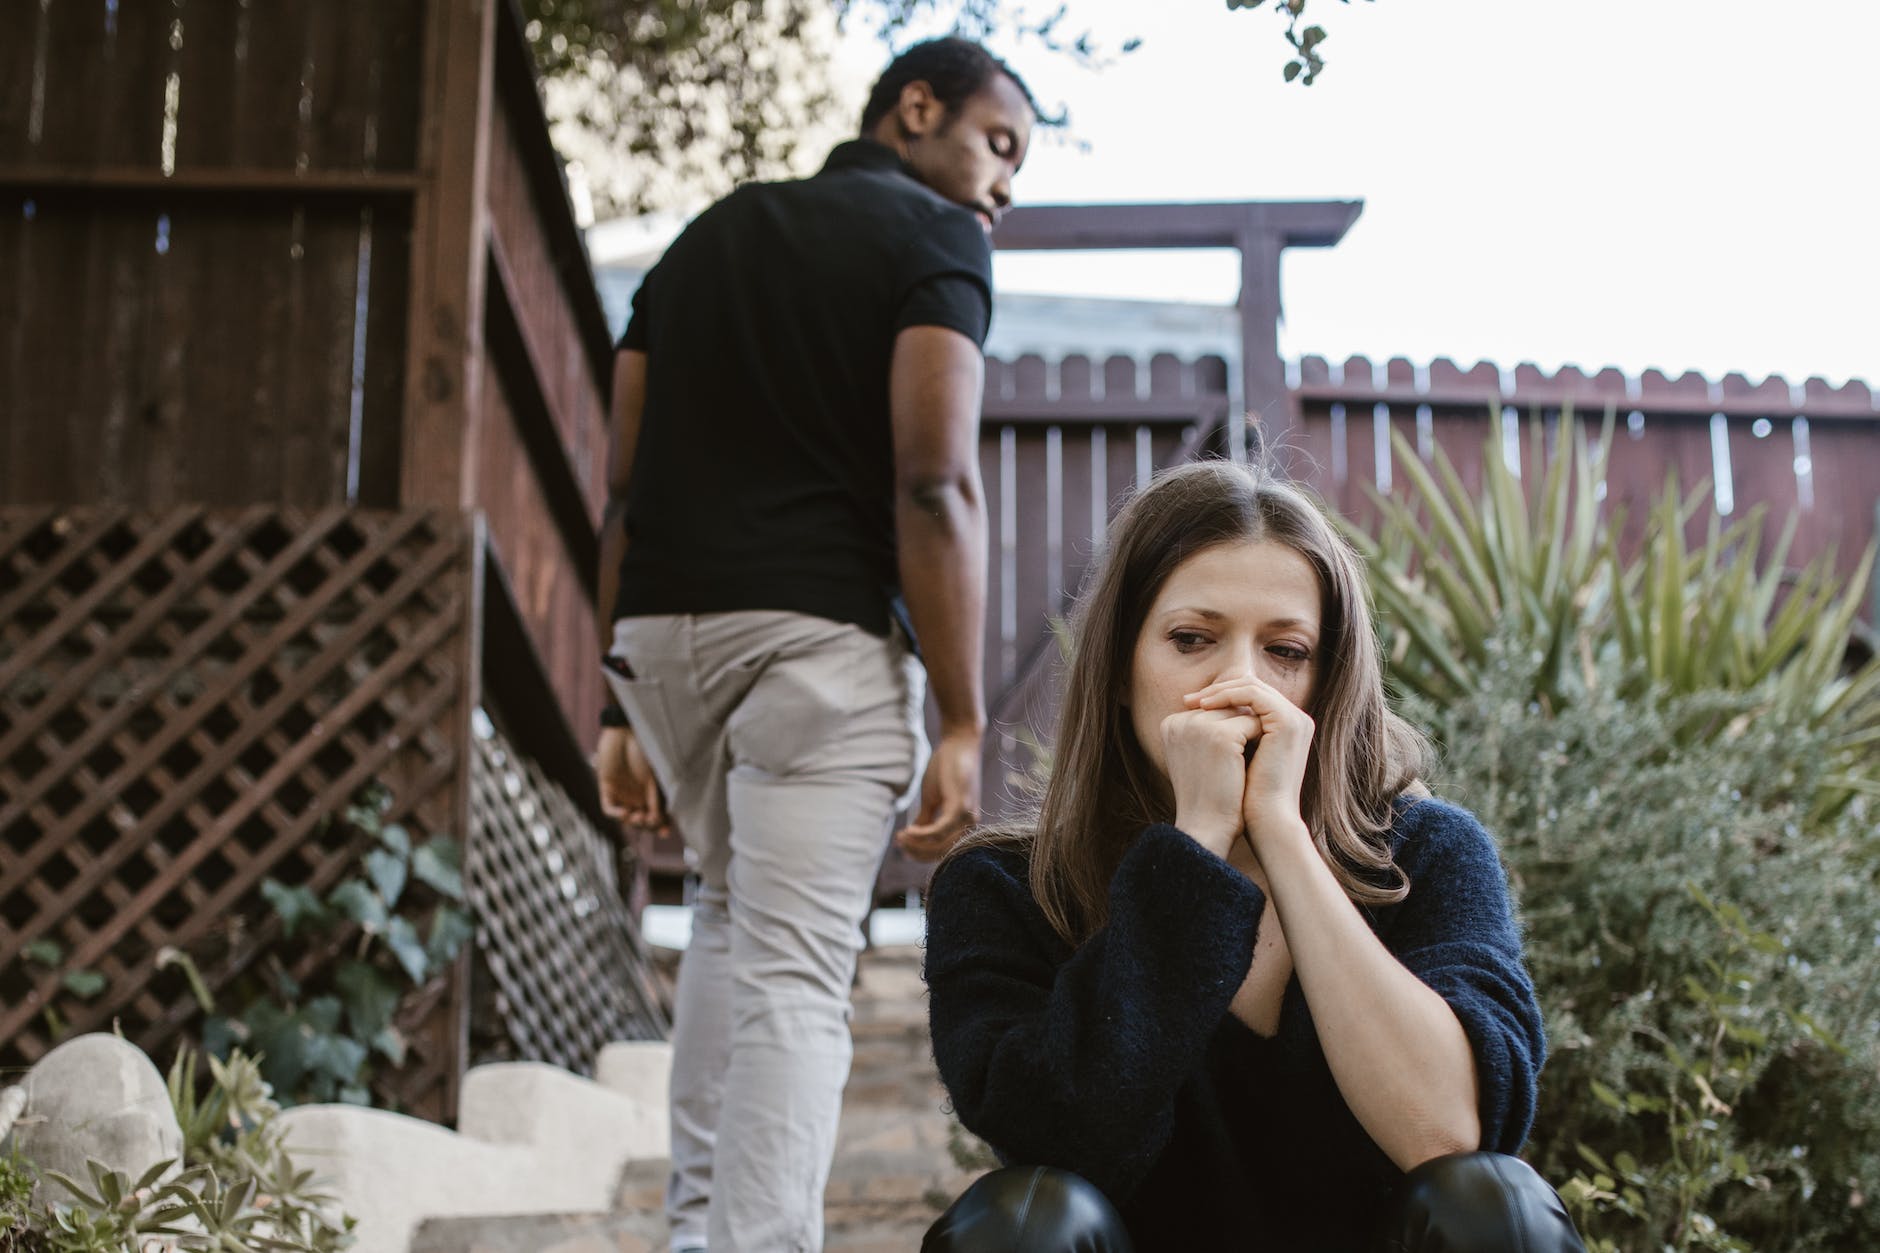 8 Signs a Guy is Just Wasting Your Time in a Relationship